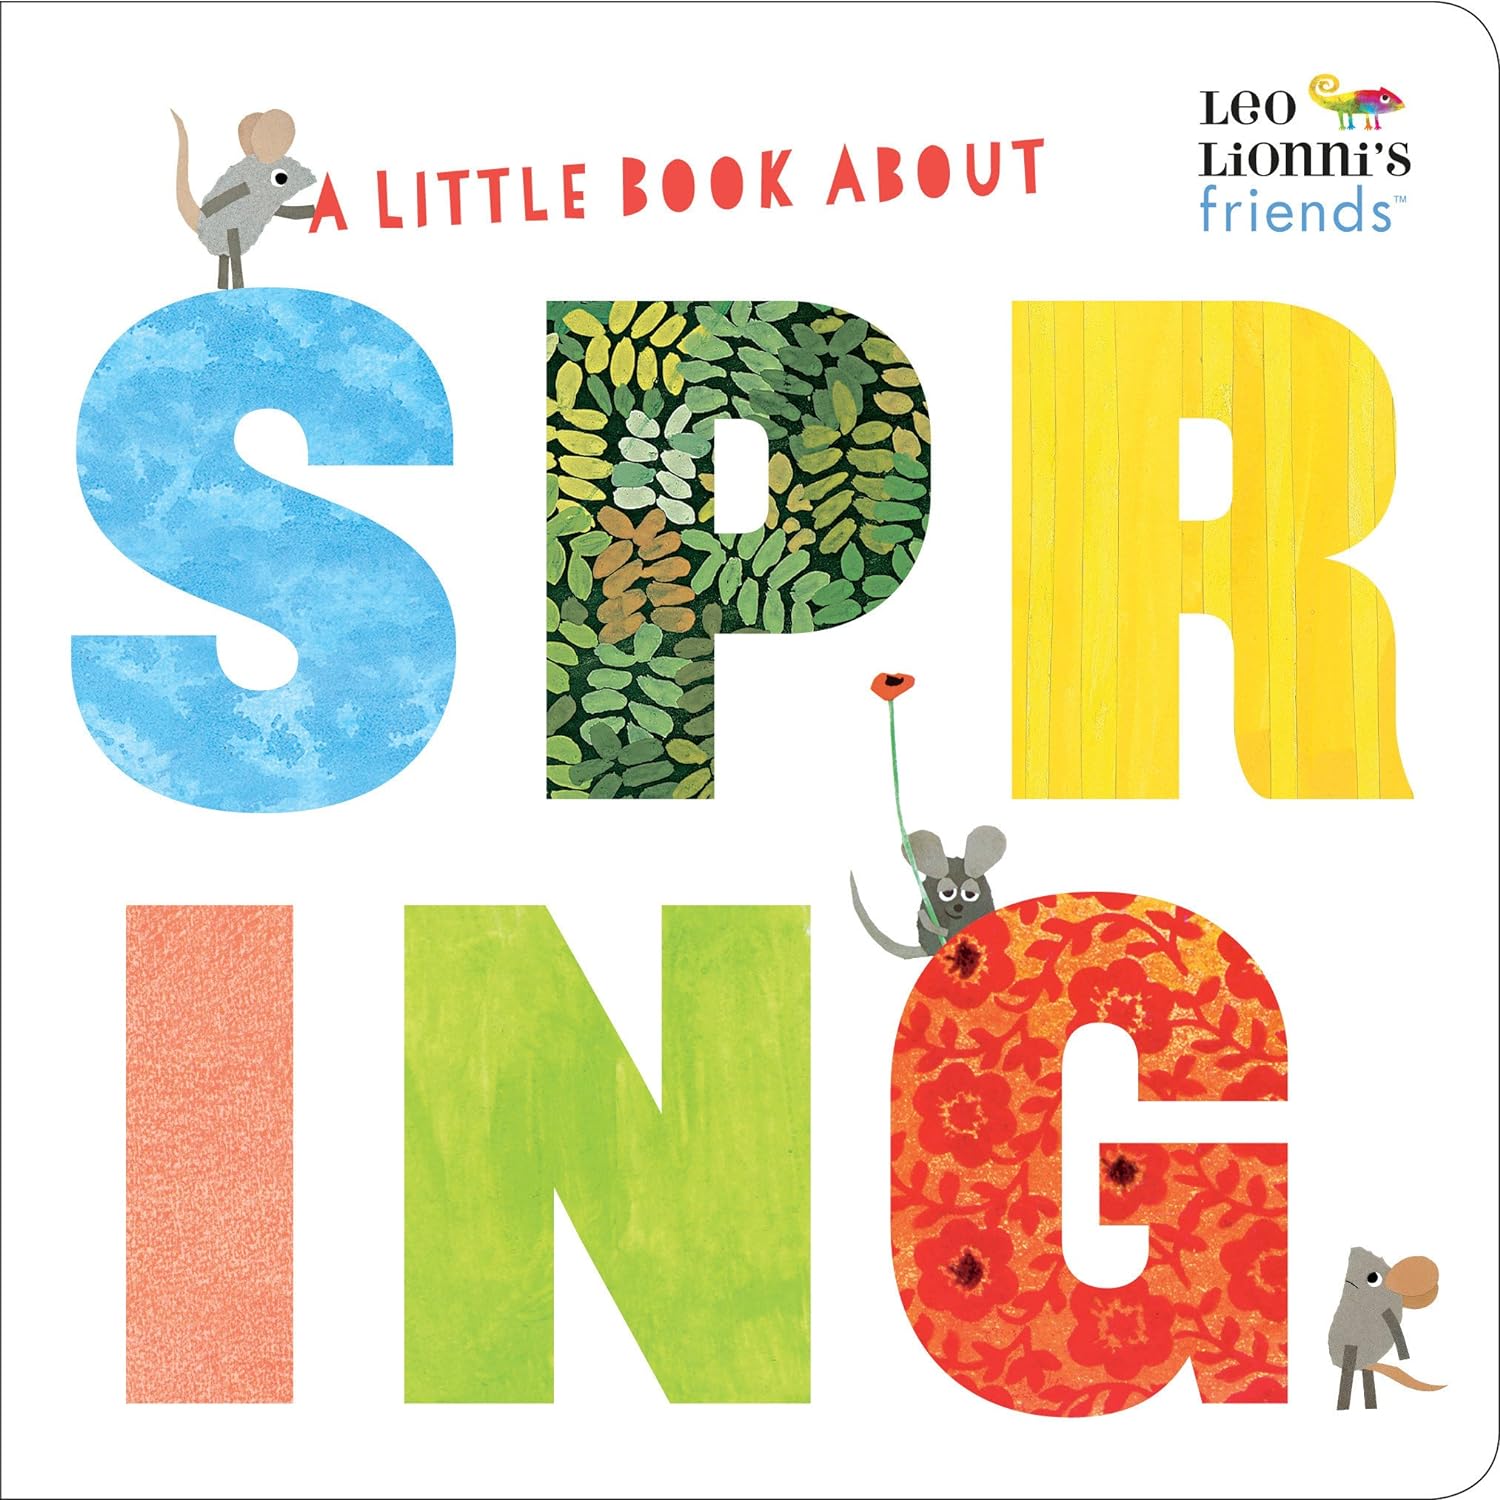 Random House Books for Young Readers 'A Little Book About Spring' by Leo Lionni, Illustrated by Julie Hamilton